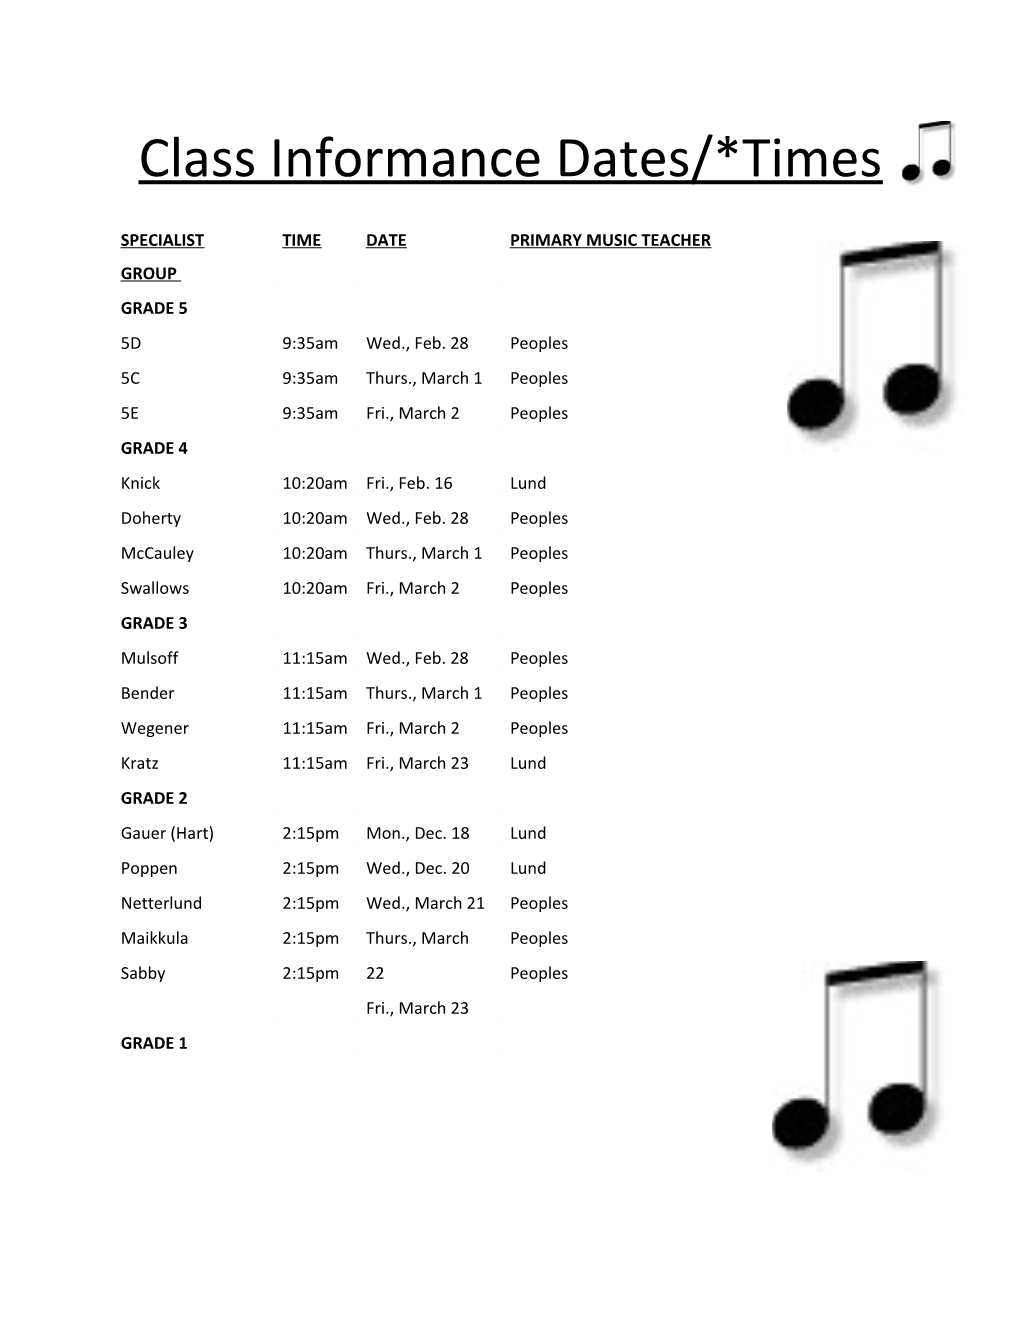 You Are Invited to a Music Informance !